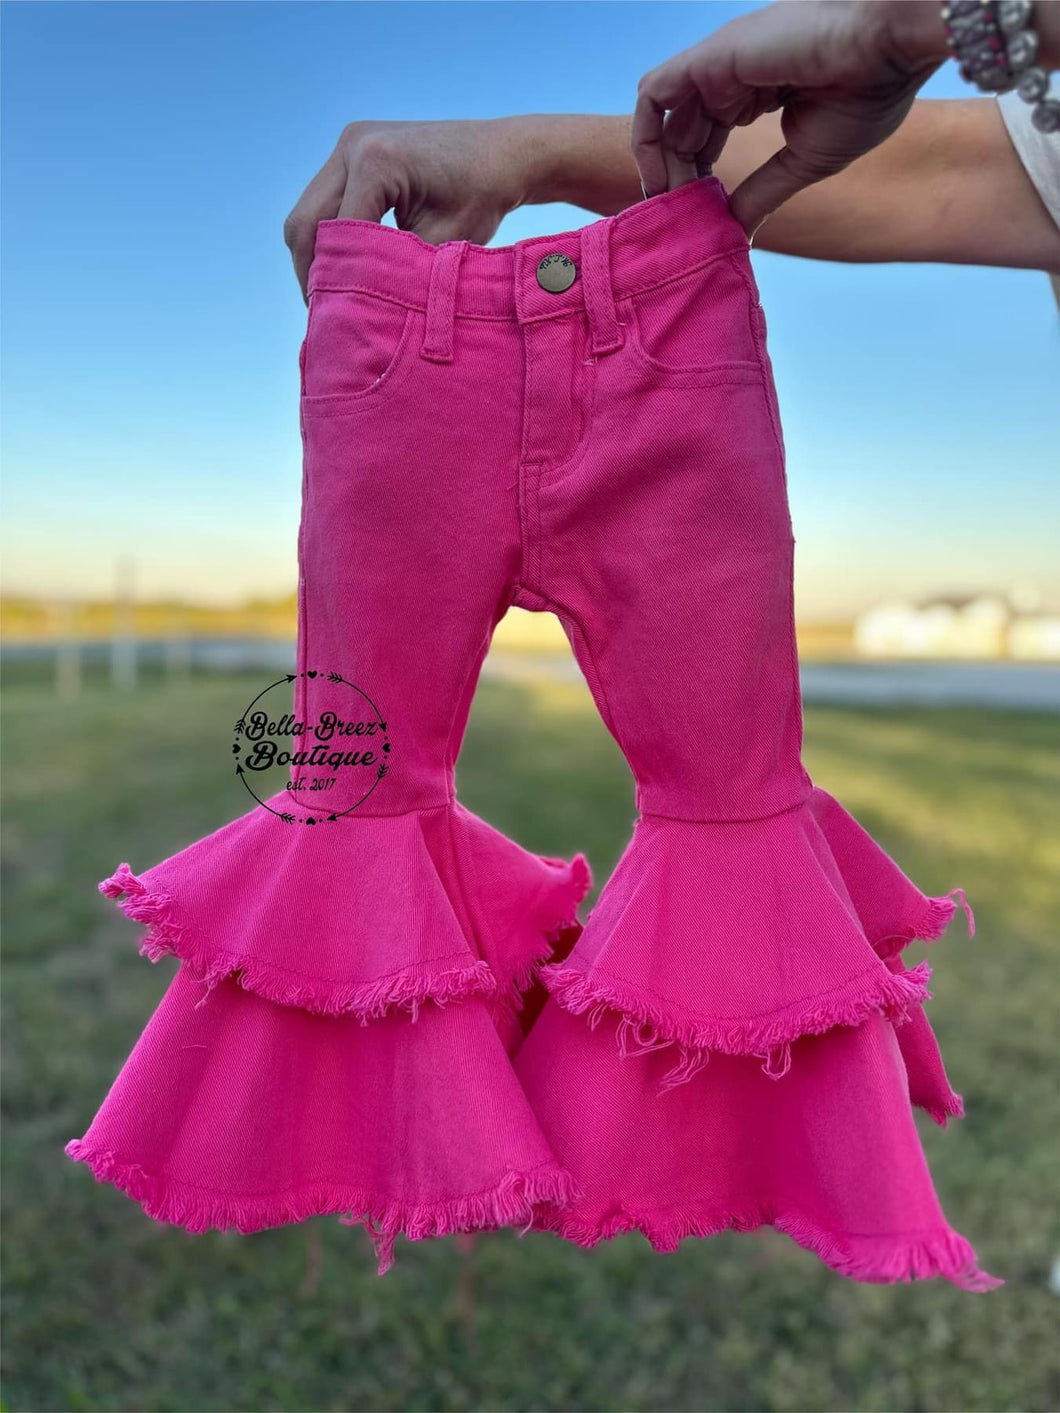 Hot Pink Rodeo Queen Jeans